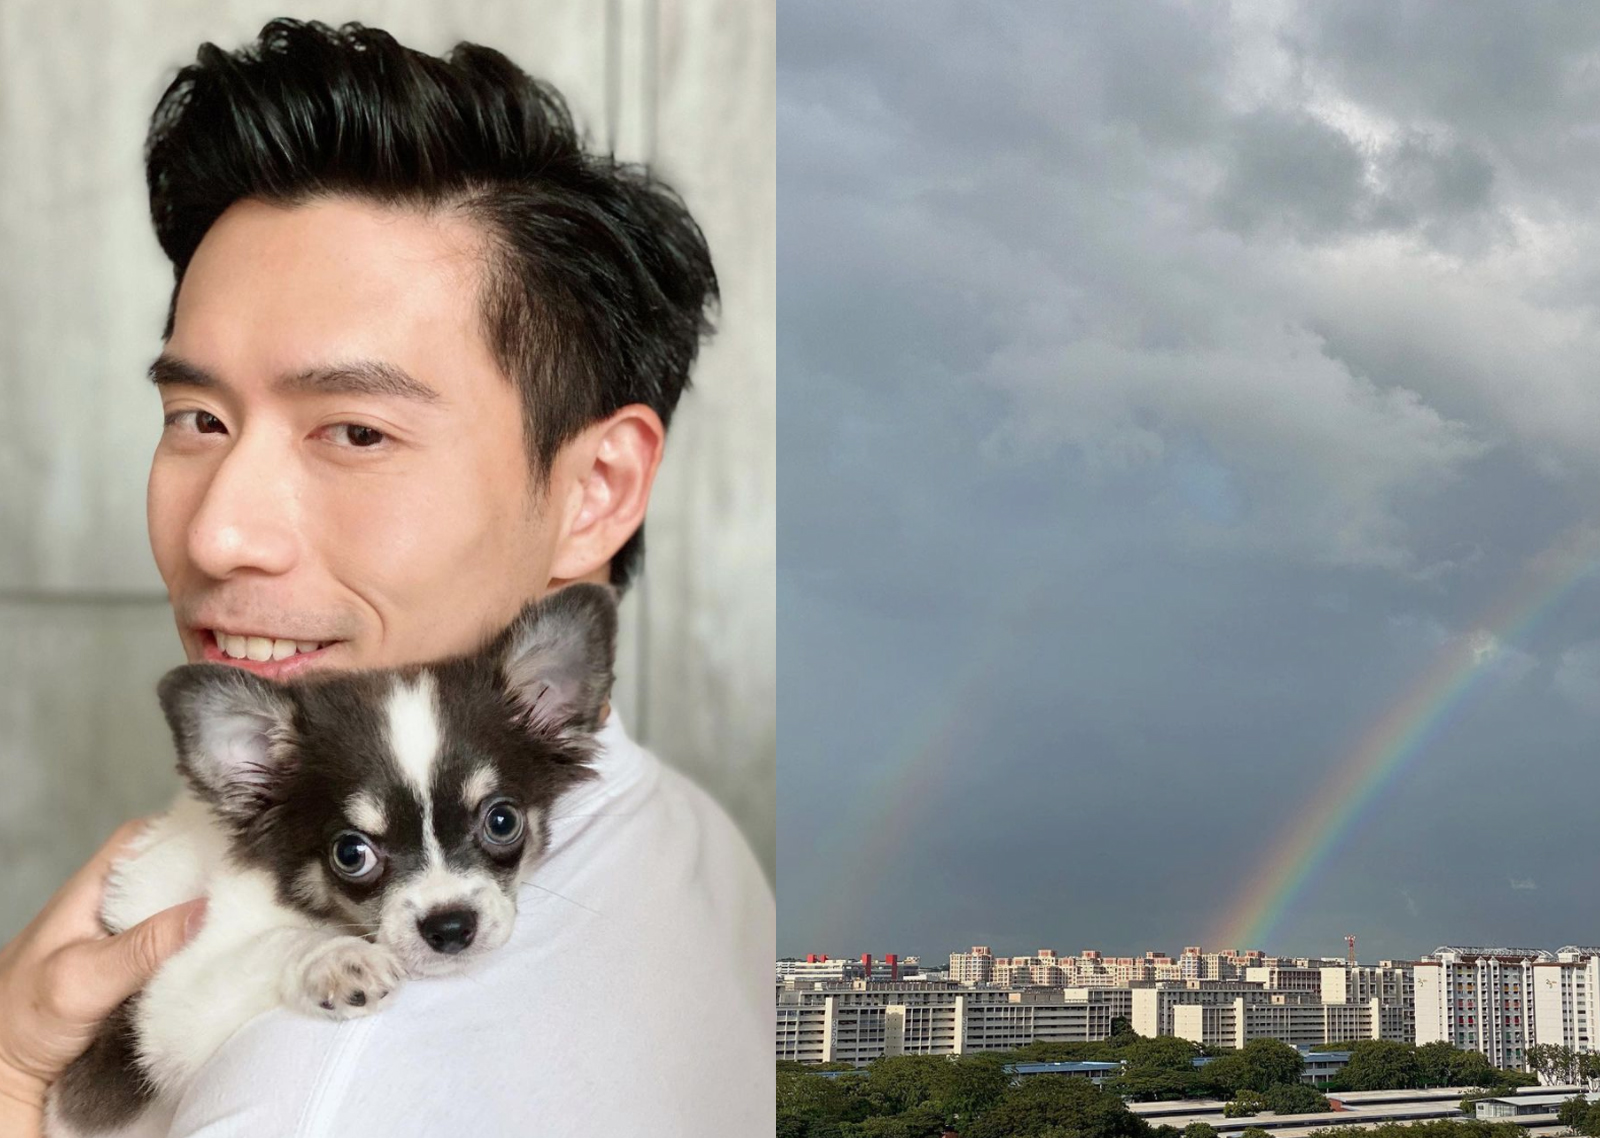 James Seah welcomed a new member to his family